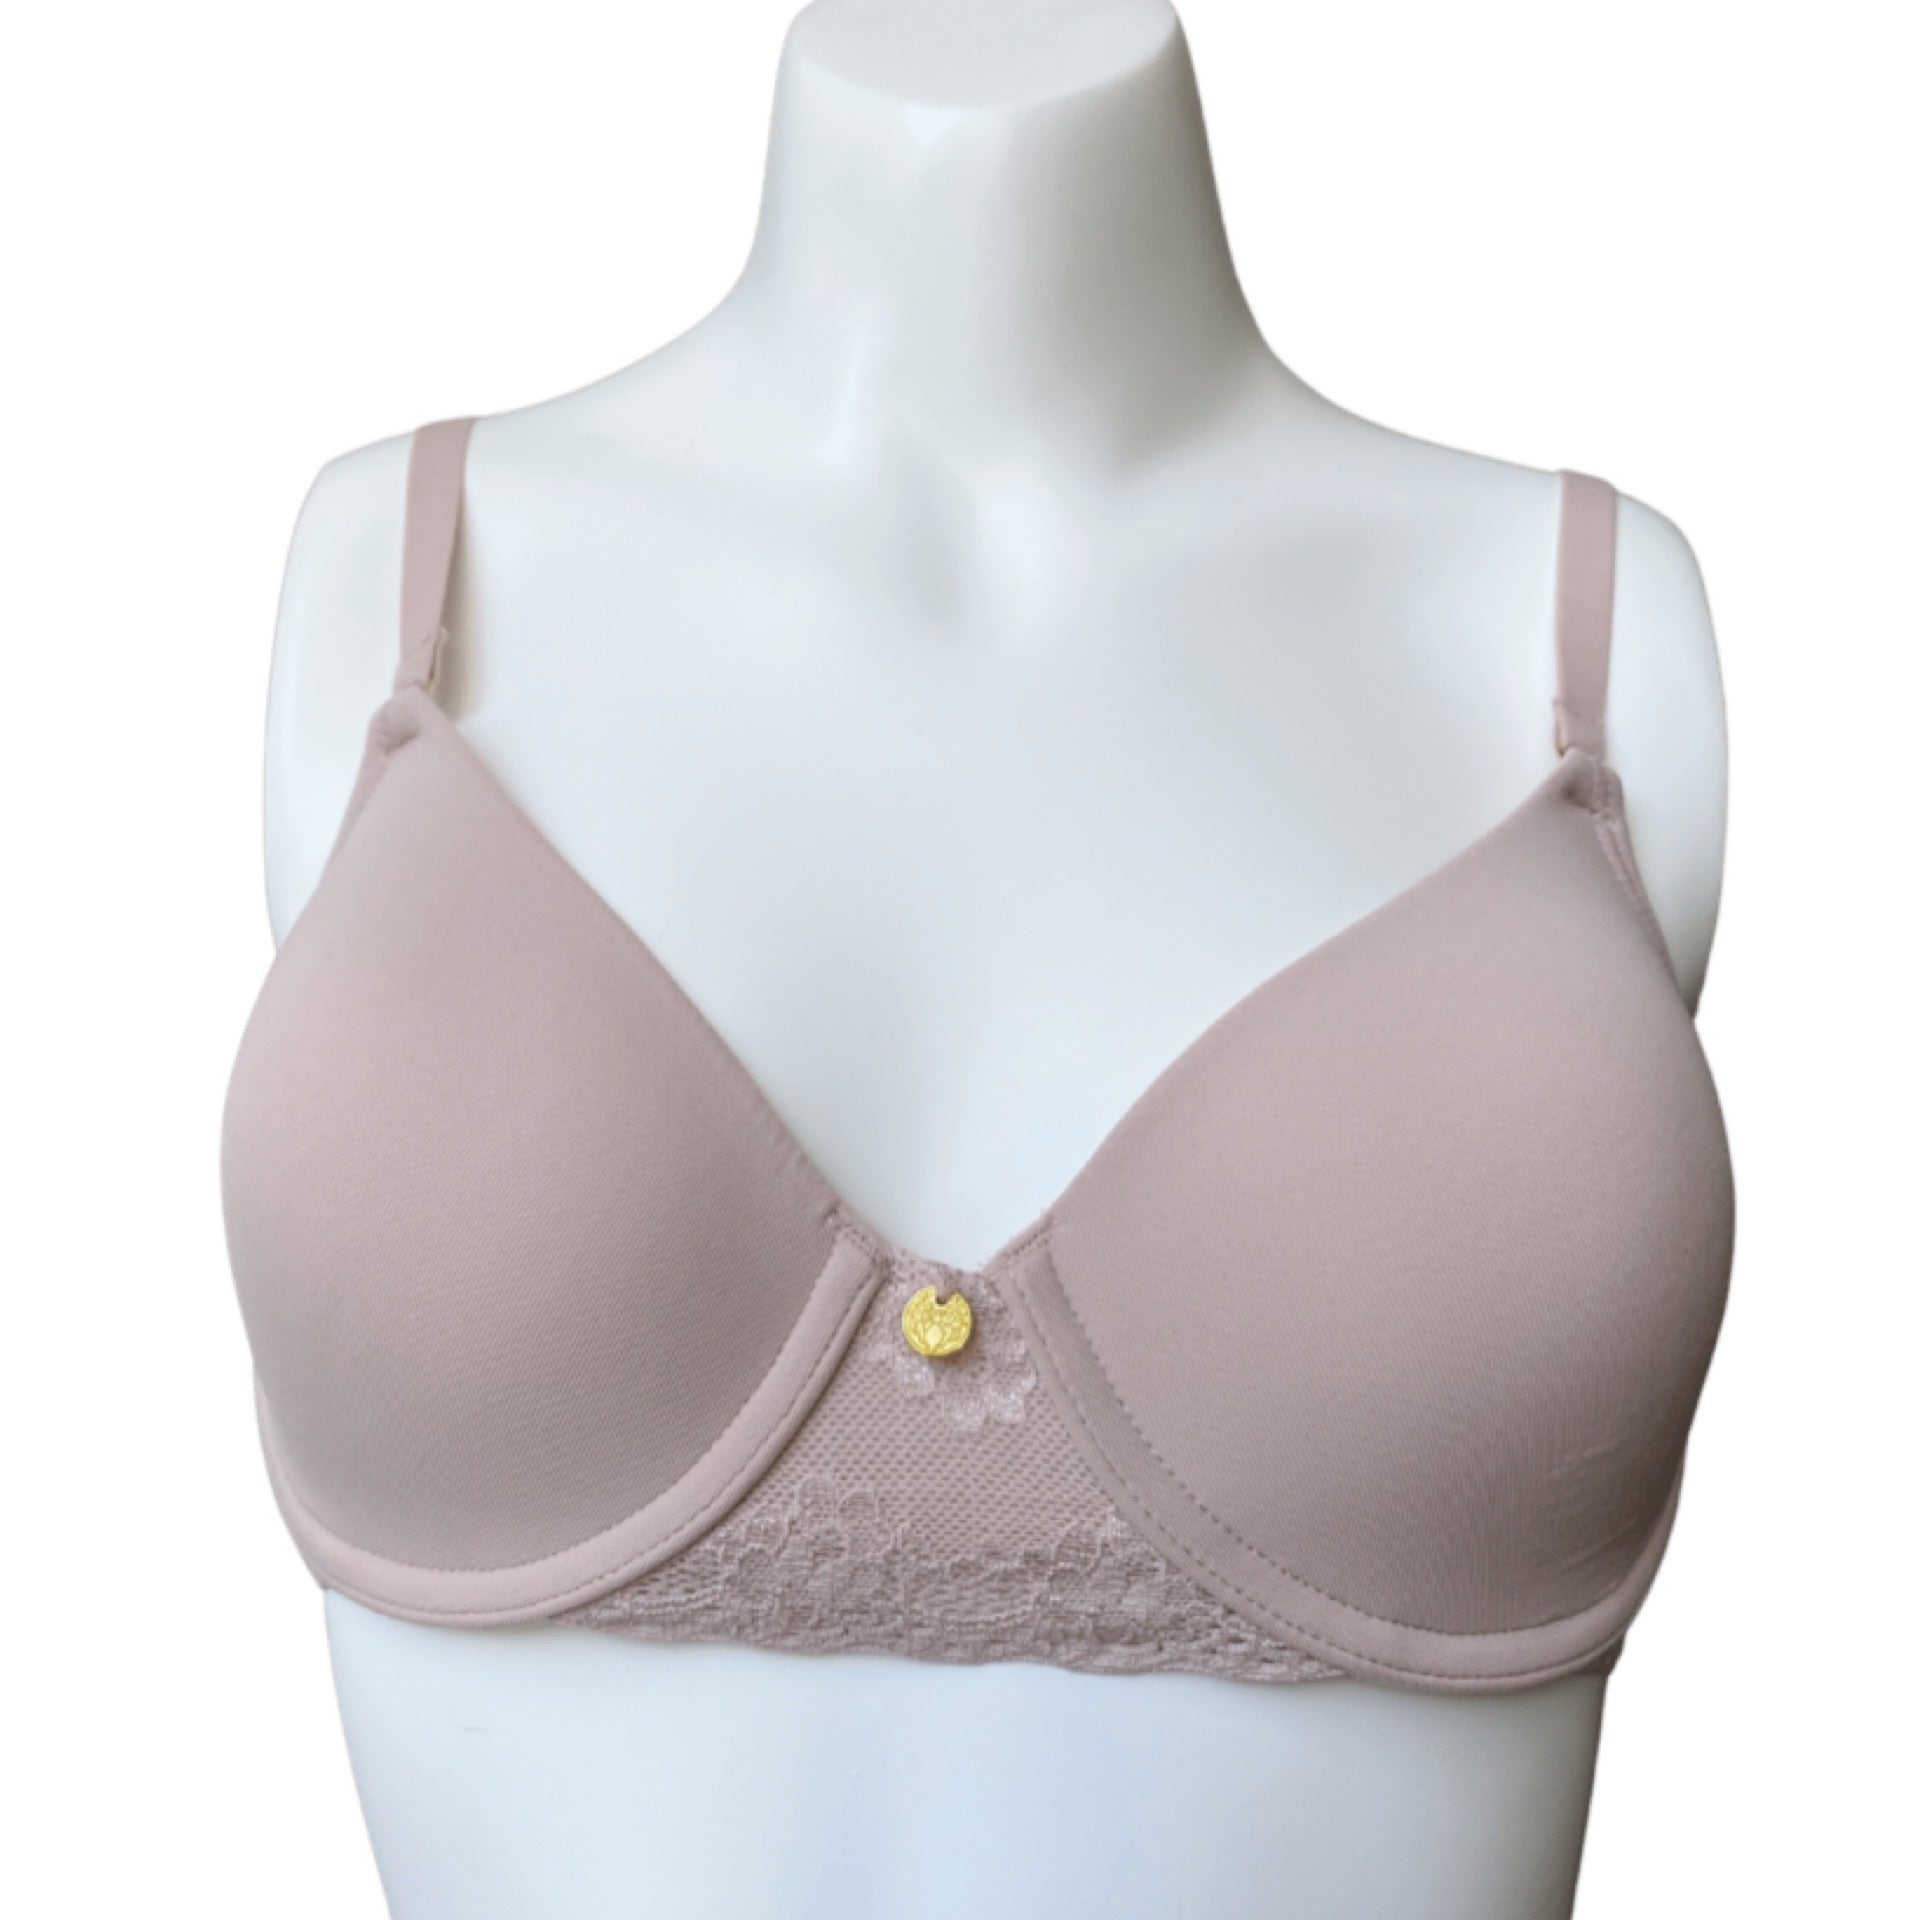 Best Deal for Natori Women's Bliss Perfection Contour Soft Cup Bra, Rose